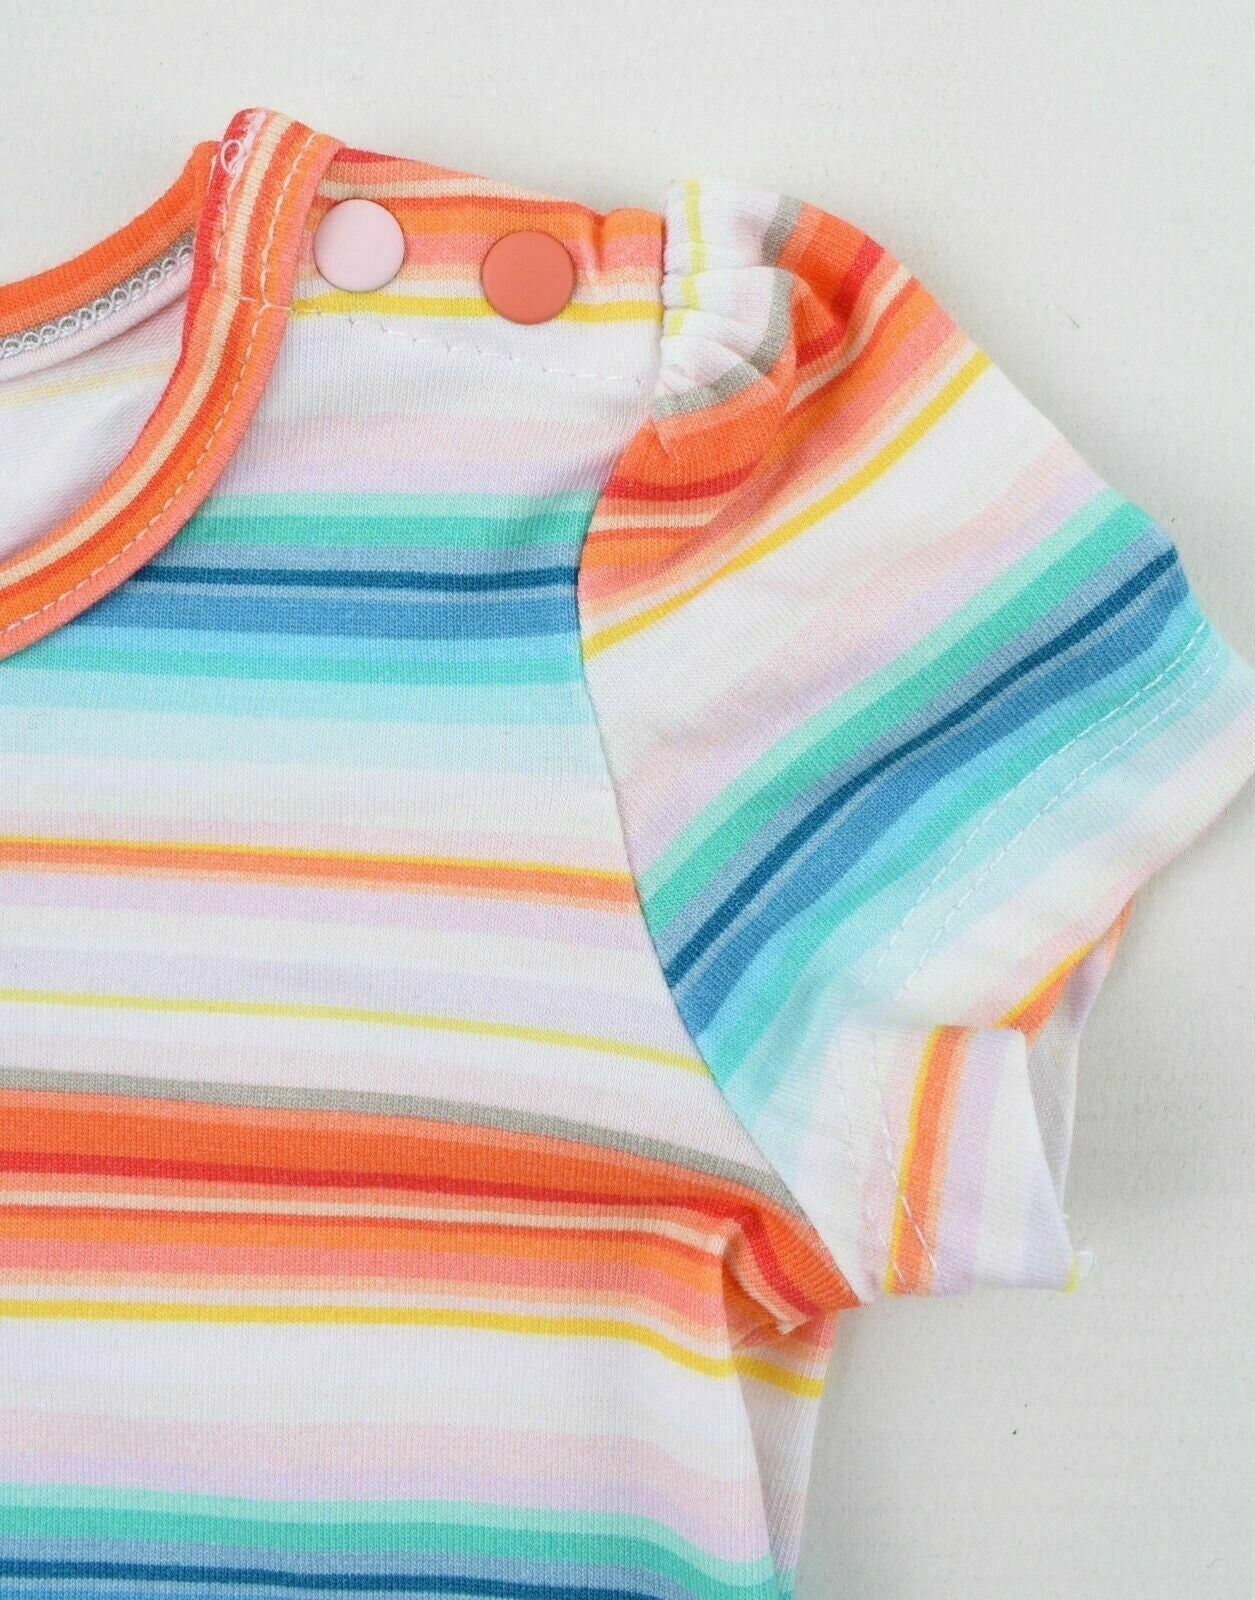 PAUL SMITH Baby Girls' Striped T-shirt Top, Multicoloured, size 3 months